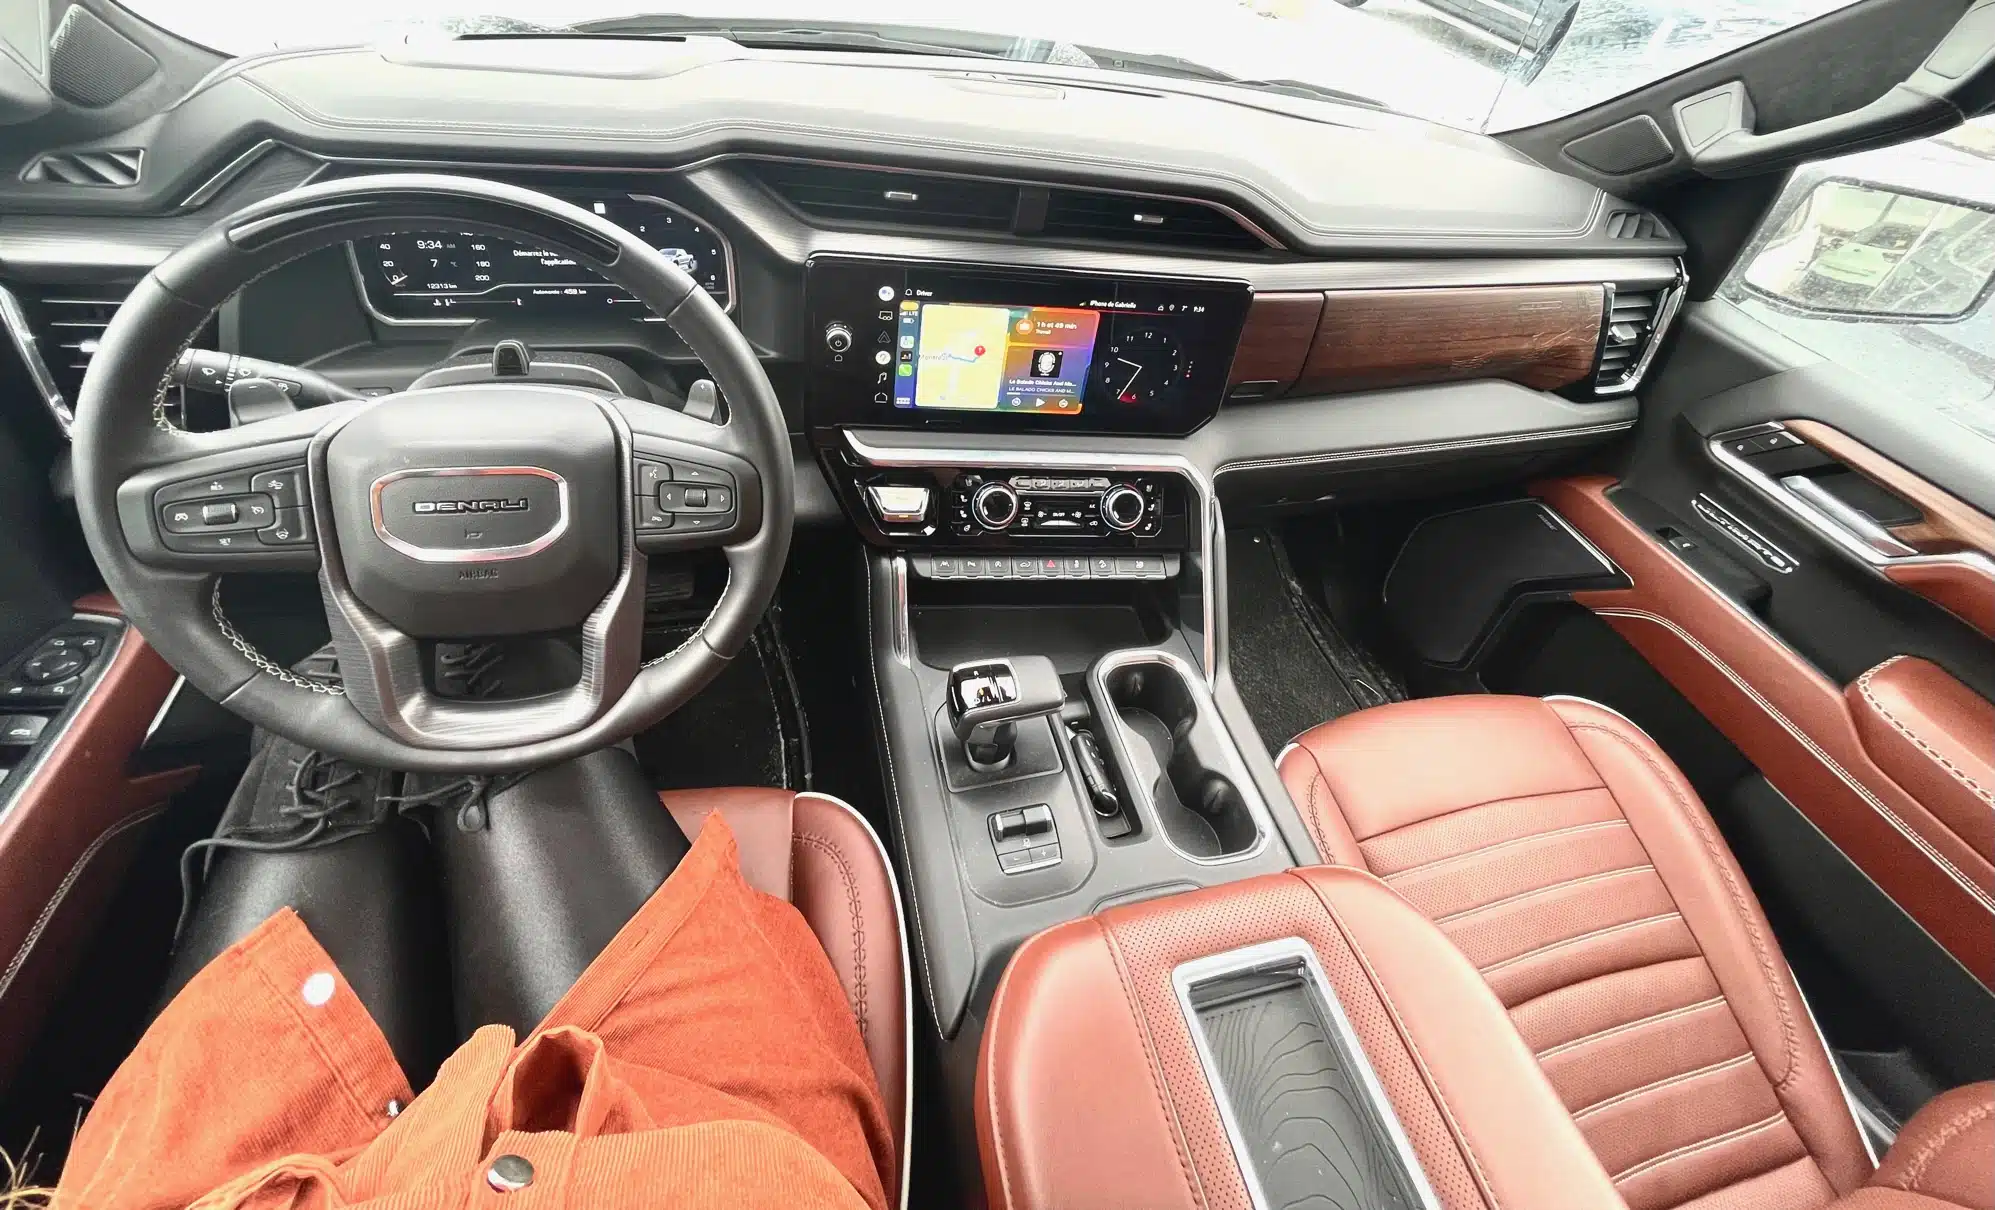 The luxurious brown leather interior